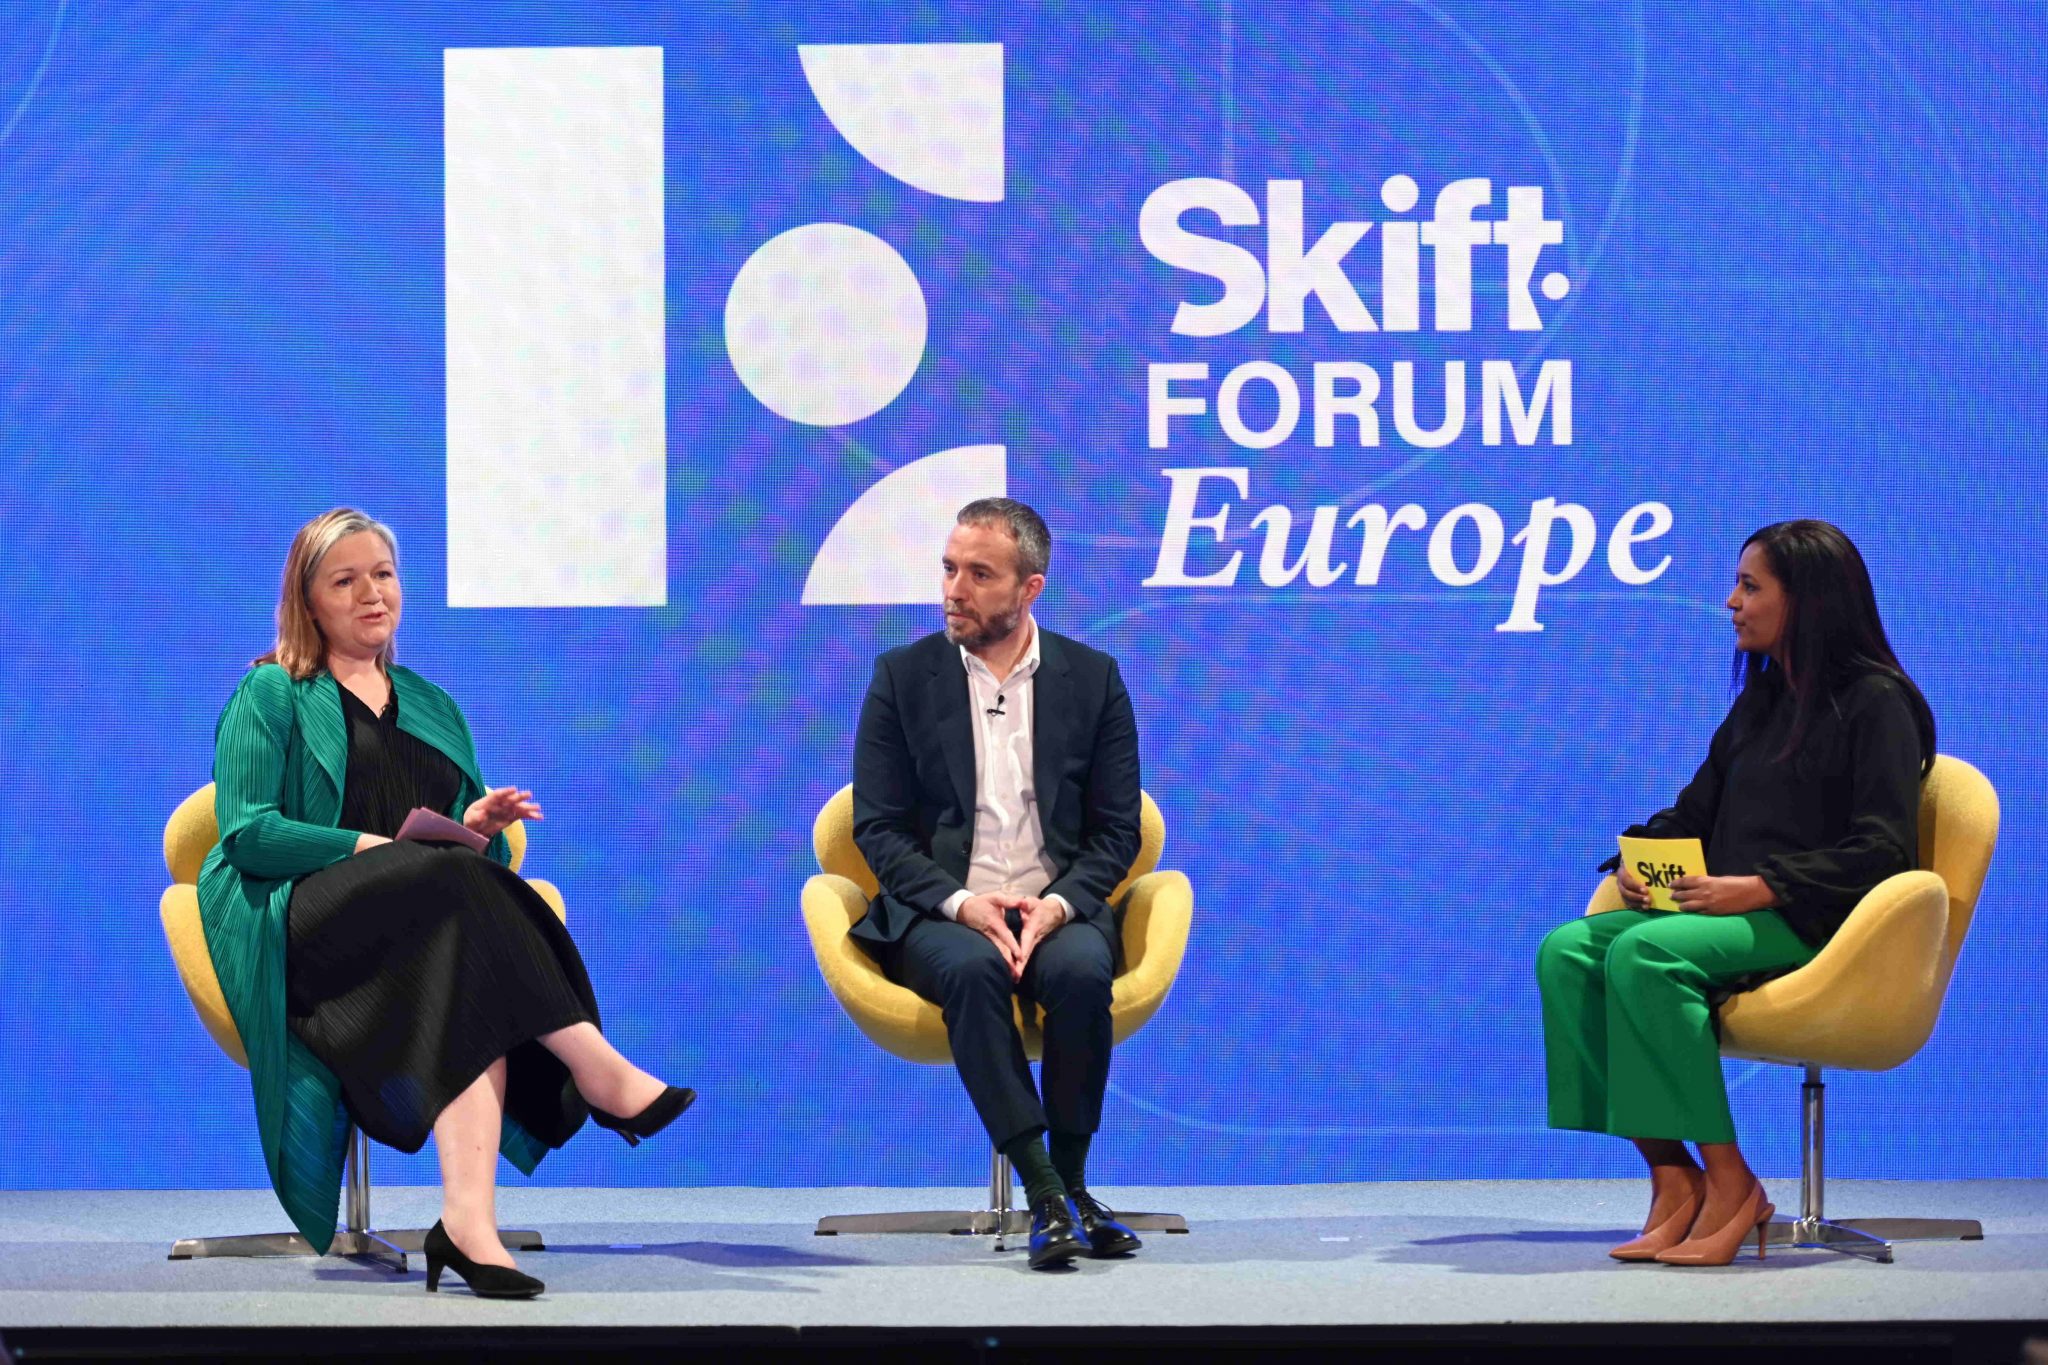 At Skift Forum Europe in March 2022 in London, Caroline Leboucher (left) spoke with Miguel Sanz and Lebawit Lily Girma about French and Spanish tourism. Source: Skift.